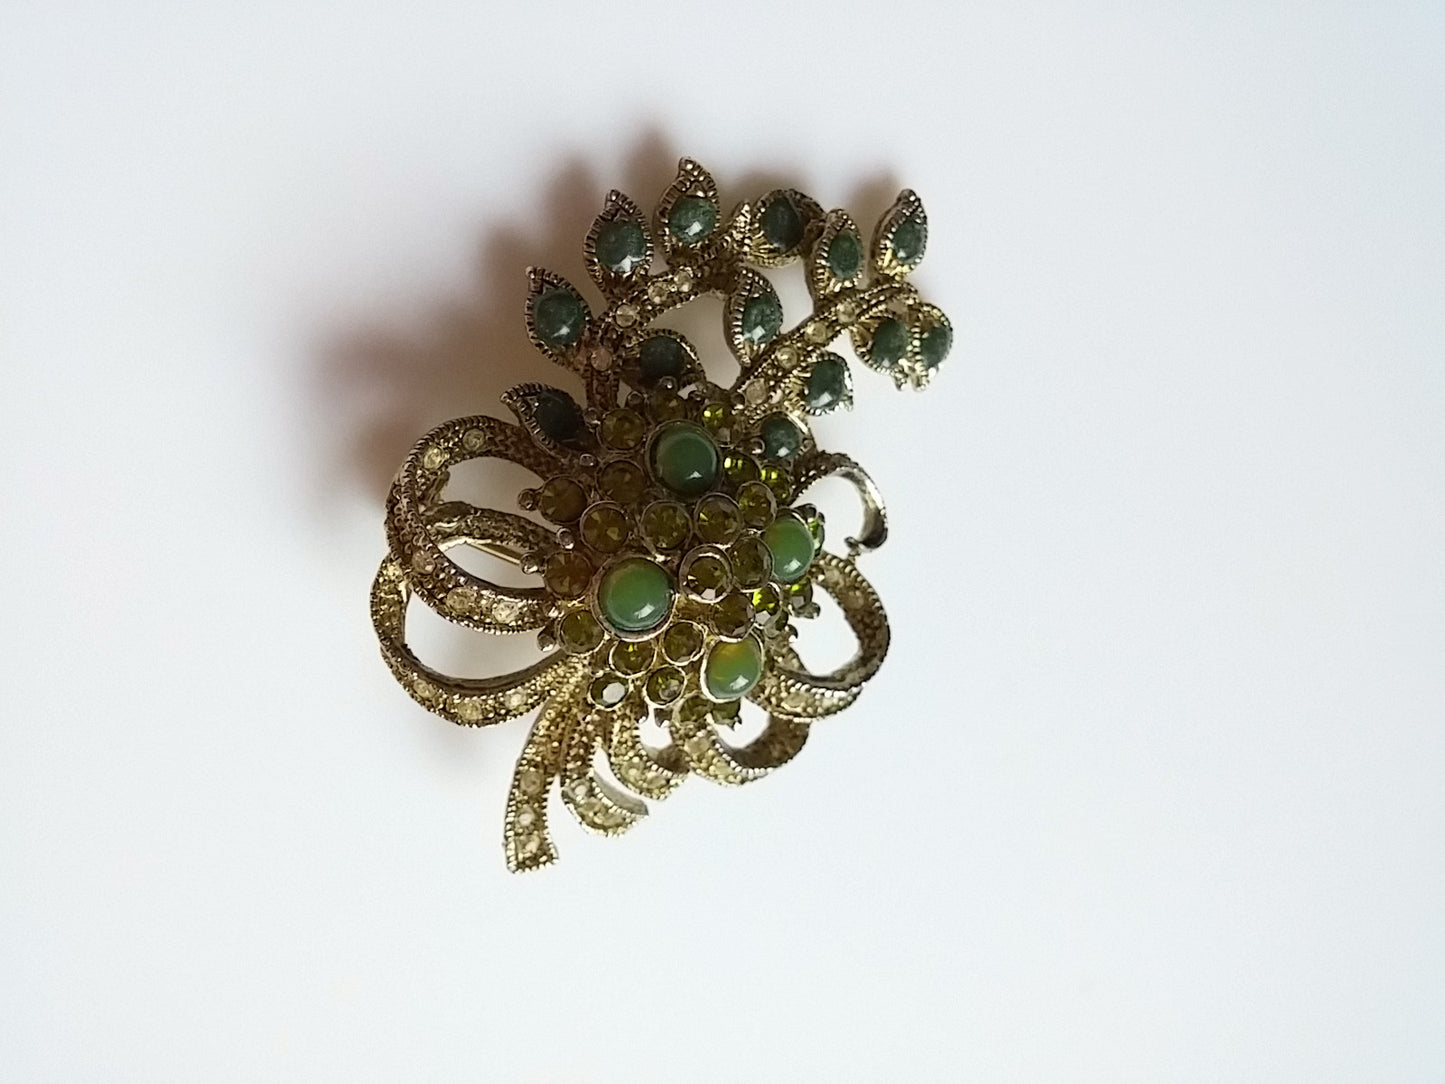 Vintage Bouquet Brooch Gold Tone w/ Green and Peridot Colored Stones - Dirty 30 Vintage | Vintage Clothing, Vintage Jewelry, Vintage Accessories